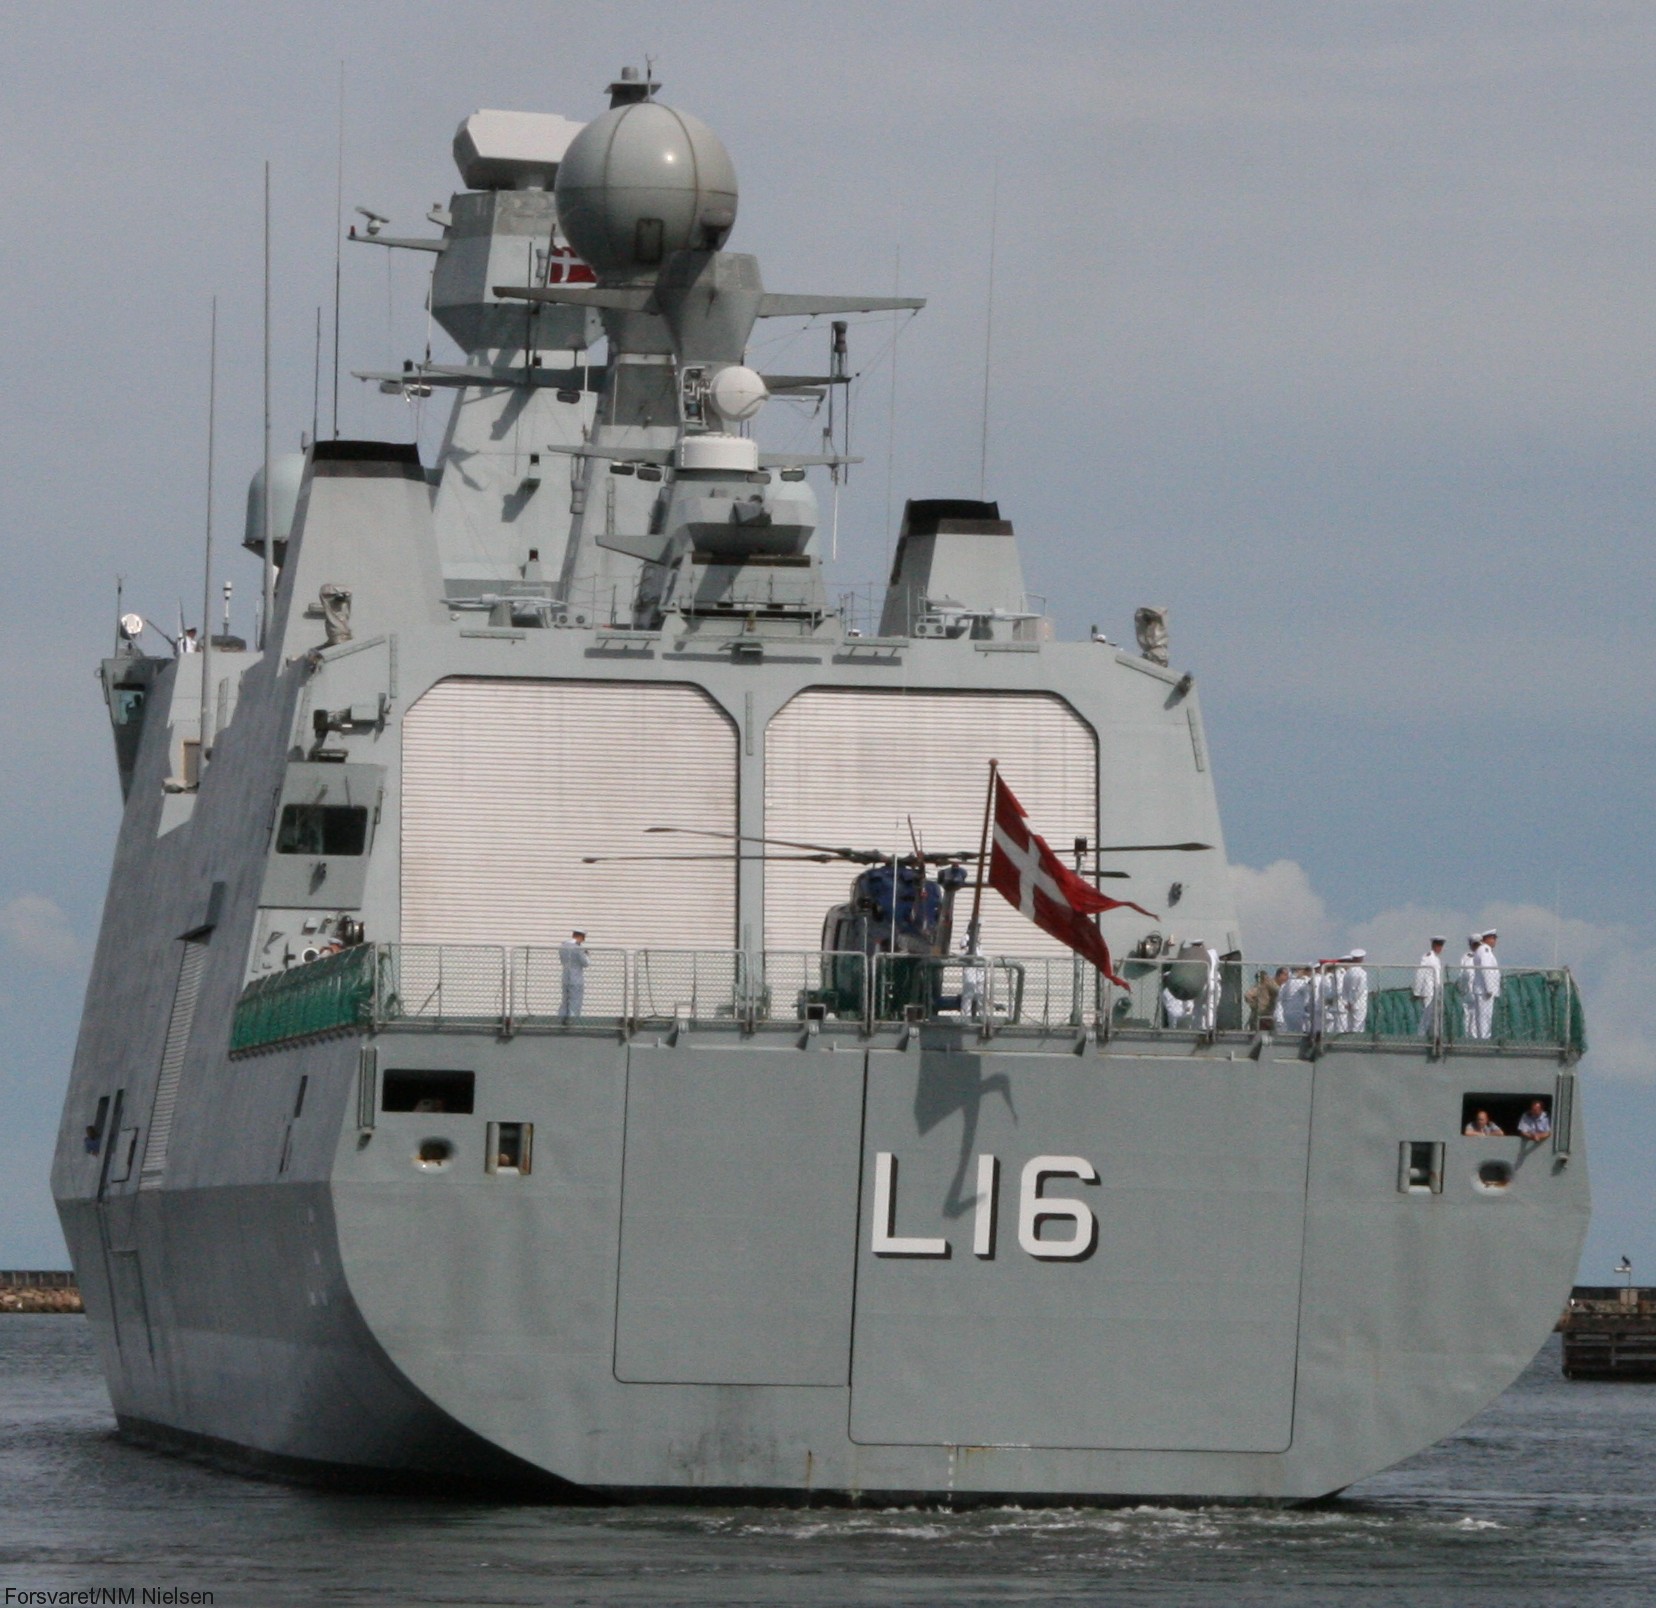 l-16 hdms absalon command support ship frigate royal danish navy 53